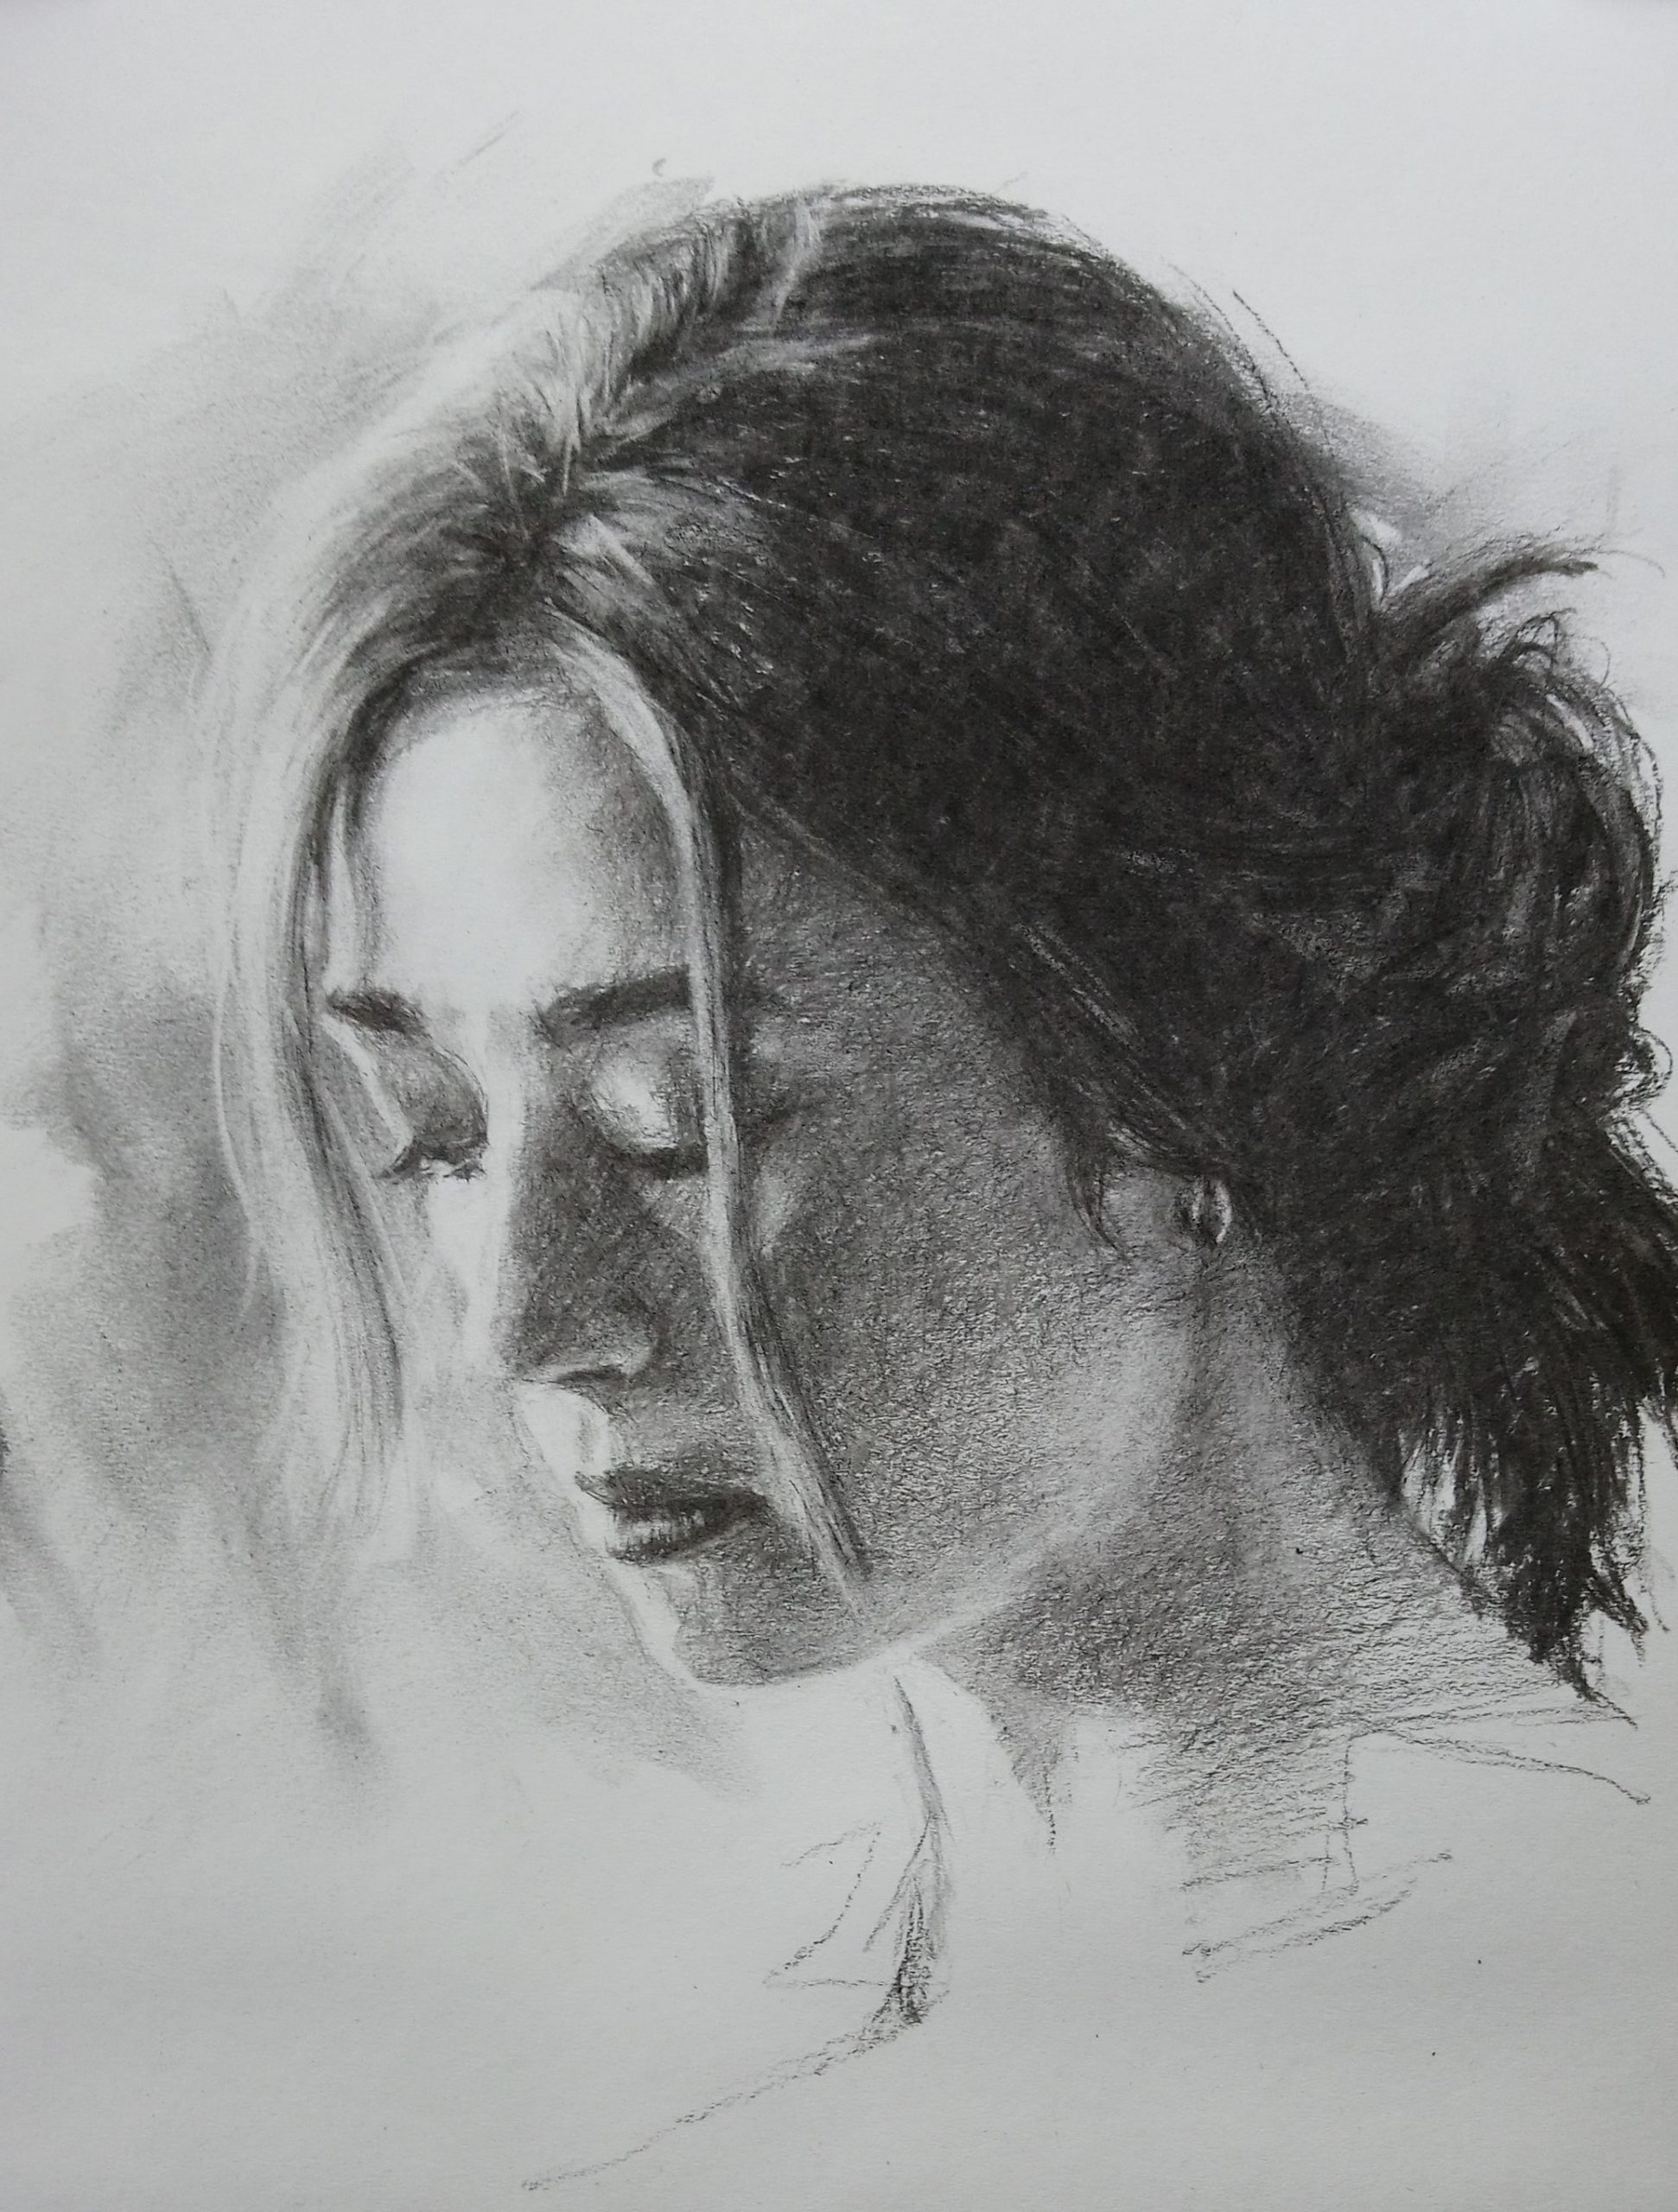 Portrait Assignment 2 – Charcoal drawing of women with hair in a loose bun